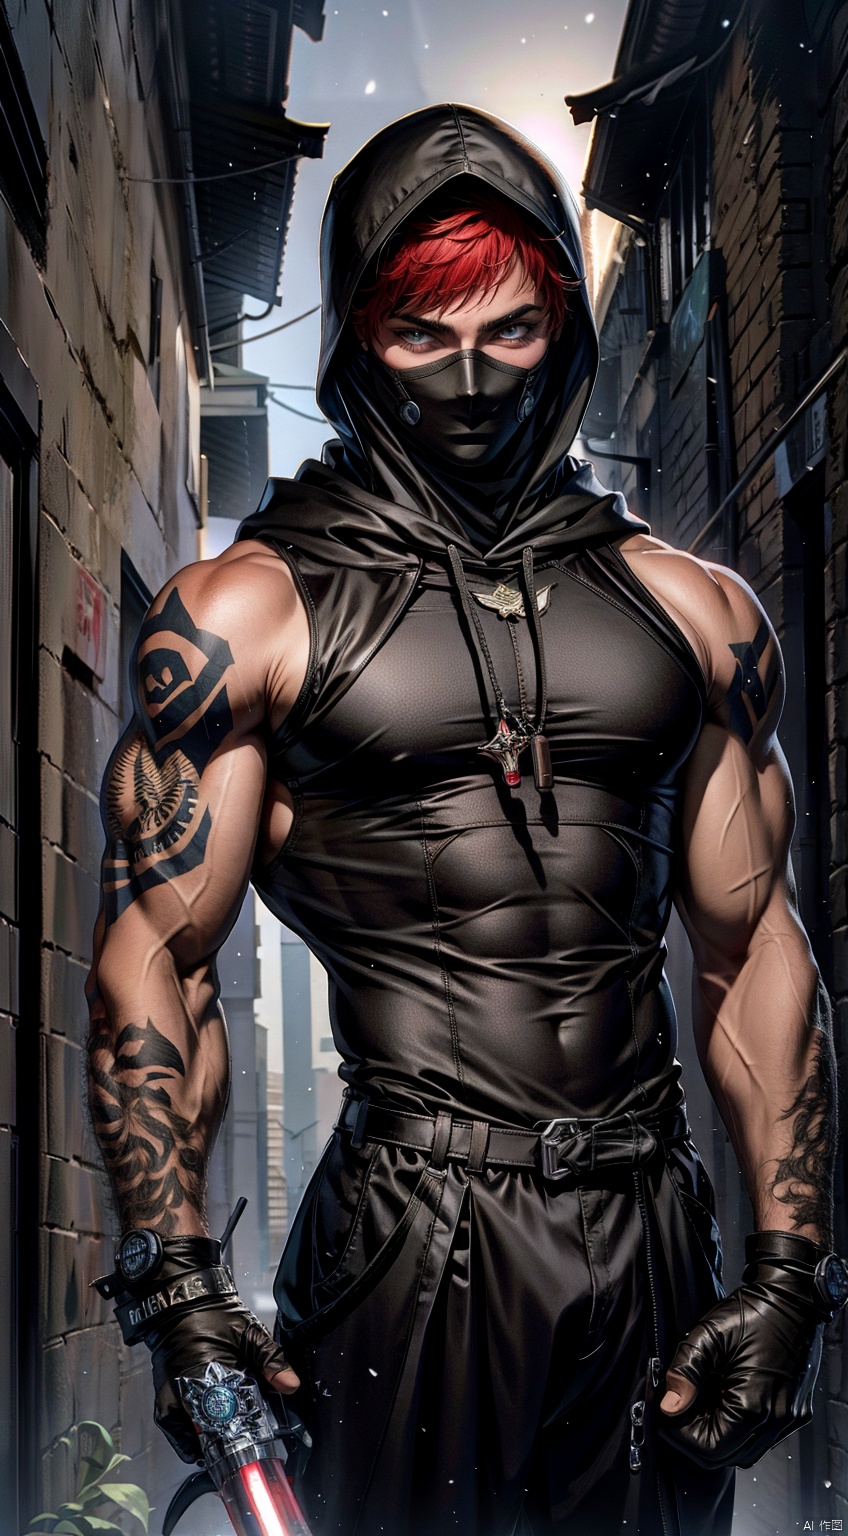  boy,16-year-old boy,Young male,A handsome boy,A strong boy,Young face,A wild smile,(Red short hair:1.5),(Wearing black high necked sleeveless tight fitting clothes:1.5),(Wearing a hood:1.5),(Wearing a black mask:1.5),(Tight fitting clothing:1.5),big muscle,(thick arms),(large pectorals:1.4),(Tattoos on arms:1.4),(Holding a dagger in hand:1.5),(There are many small daggers tied to the belt:1.5),broad shoulders,broad shoulders,slender waist,Wide shoulders and narrow waist,abdominal muscle,abs,(shiny skin:1),(dark skin:1.5),(long legs),(night:1.5),Middle Ages Alley,(A medieval alley at night:1.5),(A complex and detailed background),realistic,best quality,dynamic lighting,natural shadow,ray tracing,volumetric lighting,highest detail,detailed background,insane details,intricate,detailed face,detailed skin,subsurface scattering